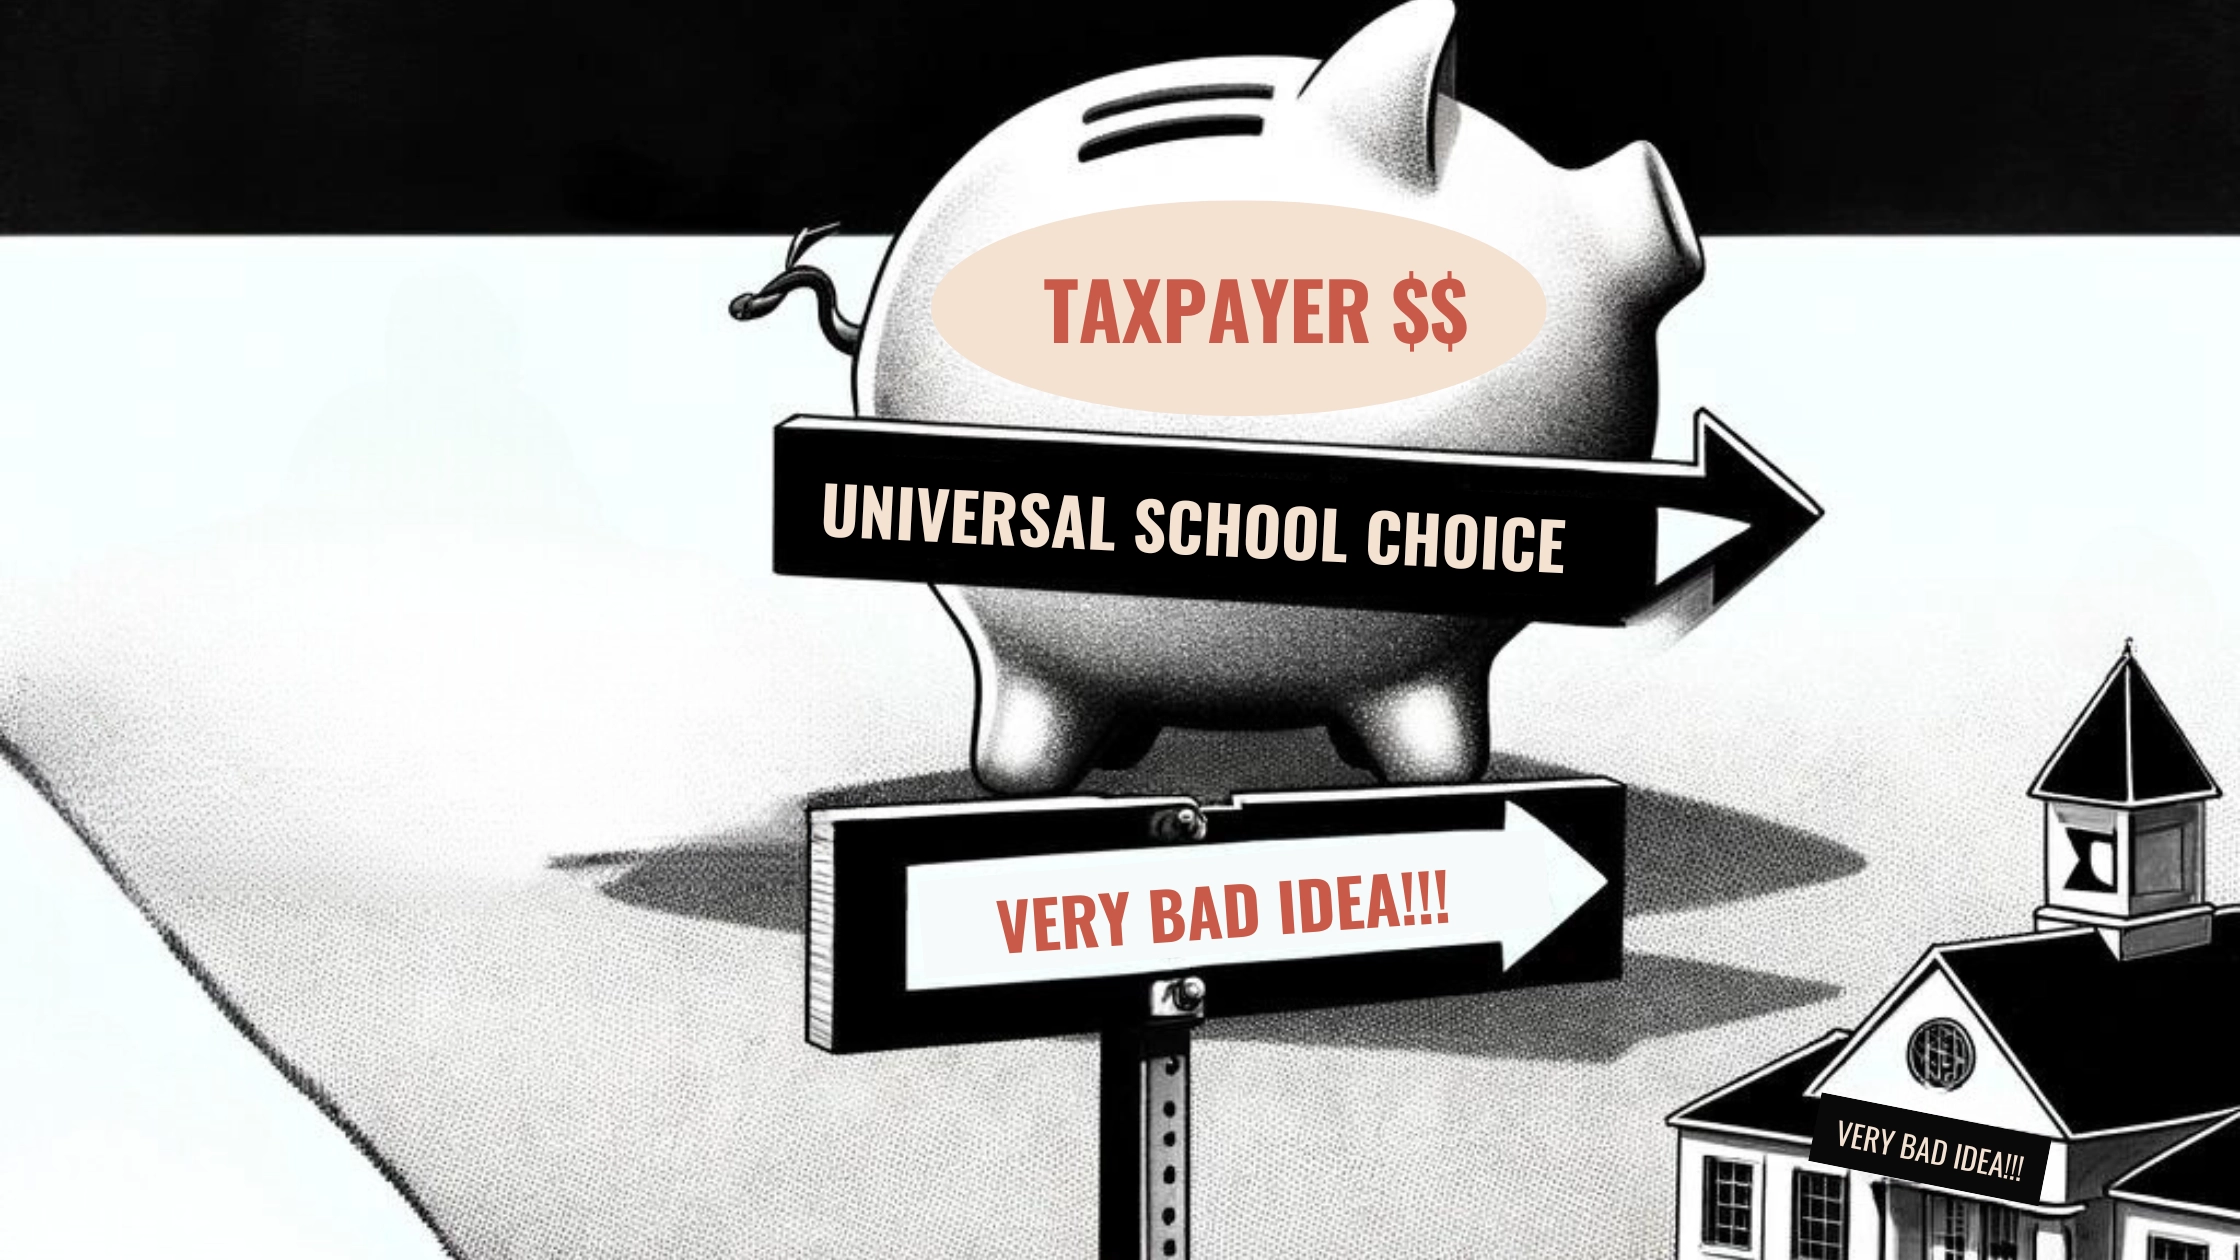 Taxpayers funding “universal school choice" is a VERY BAD IDEA!